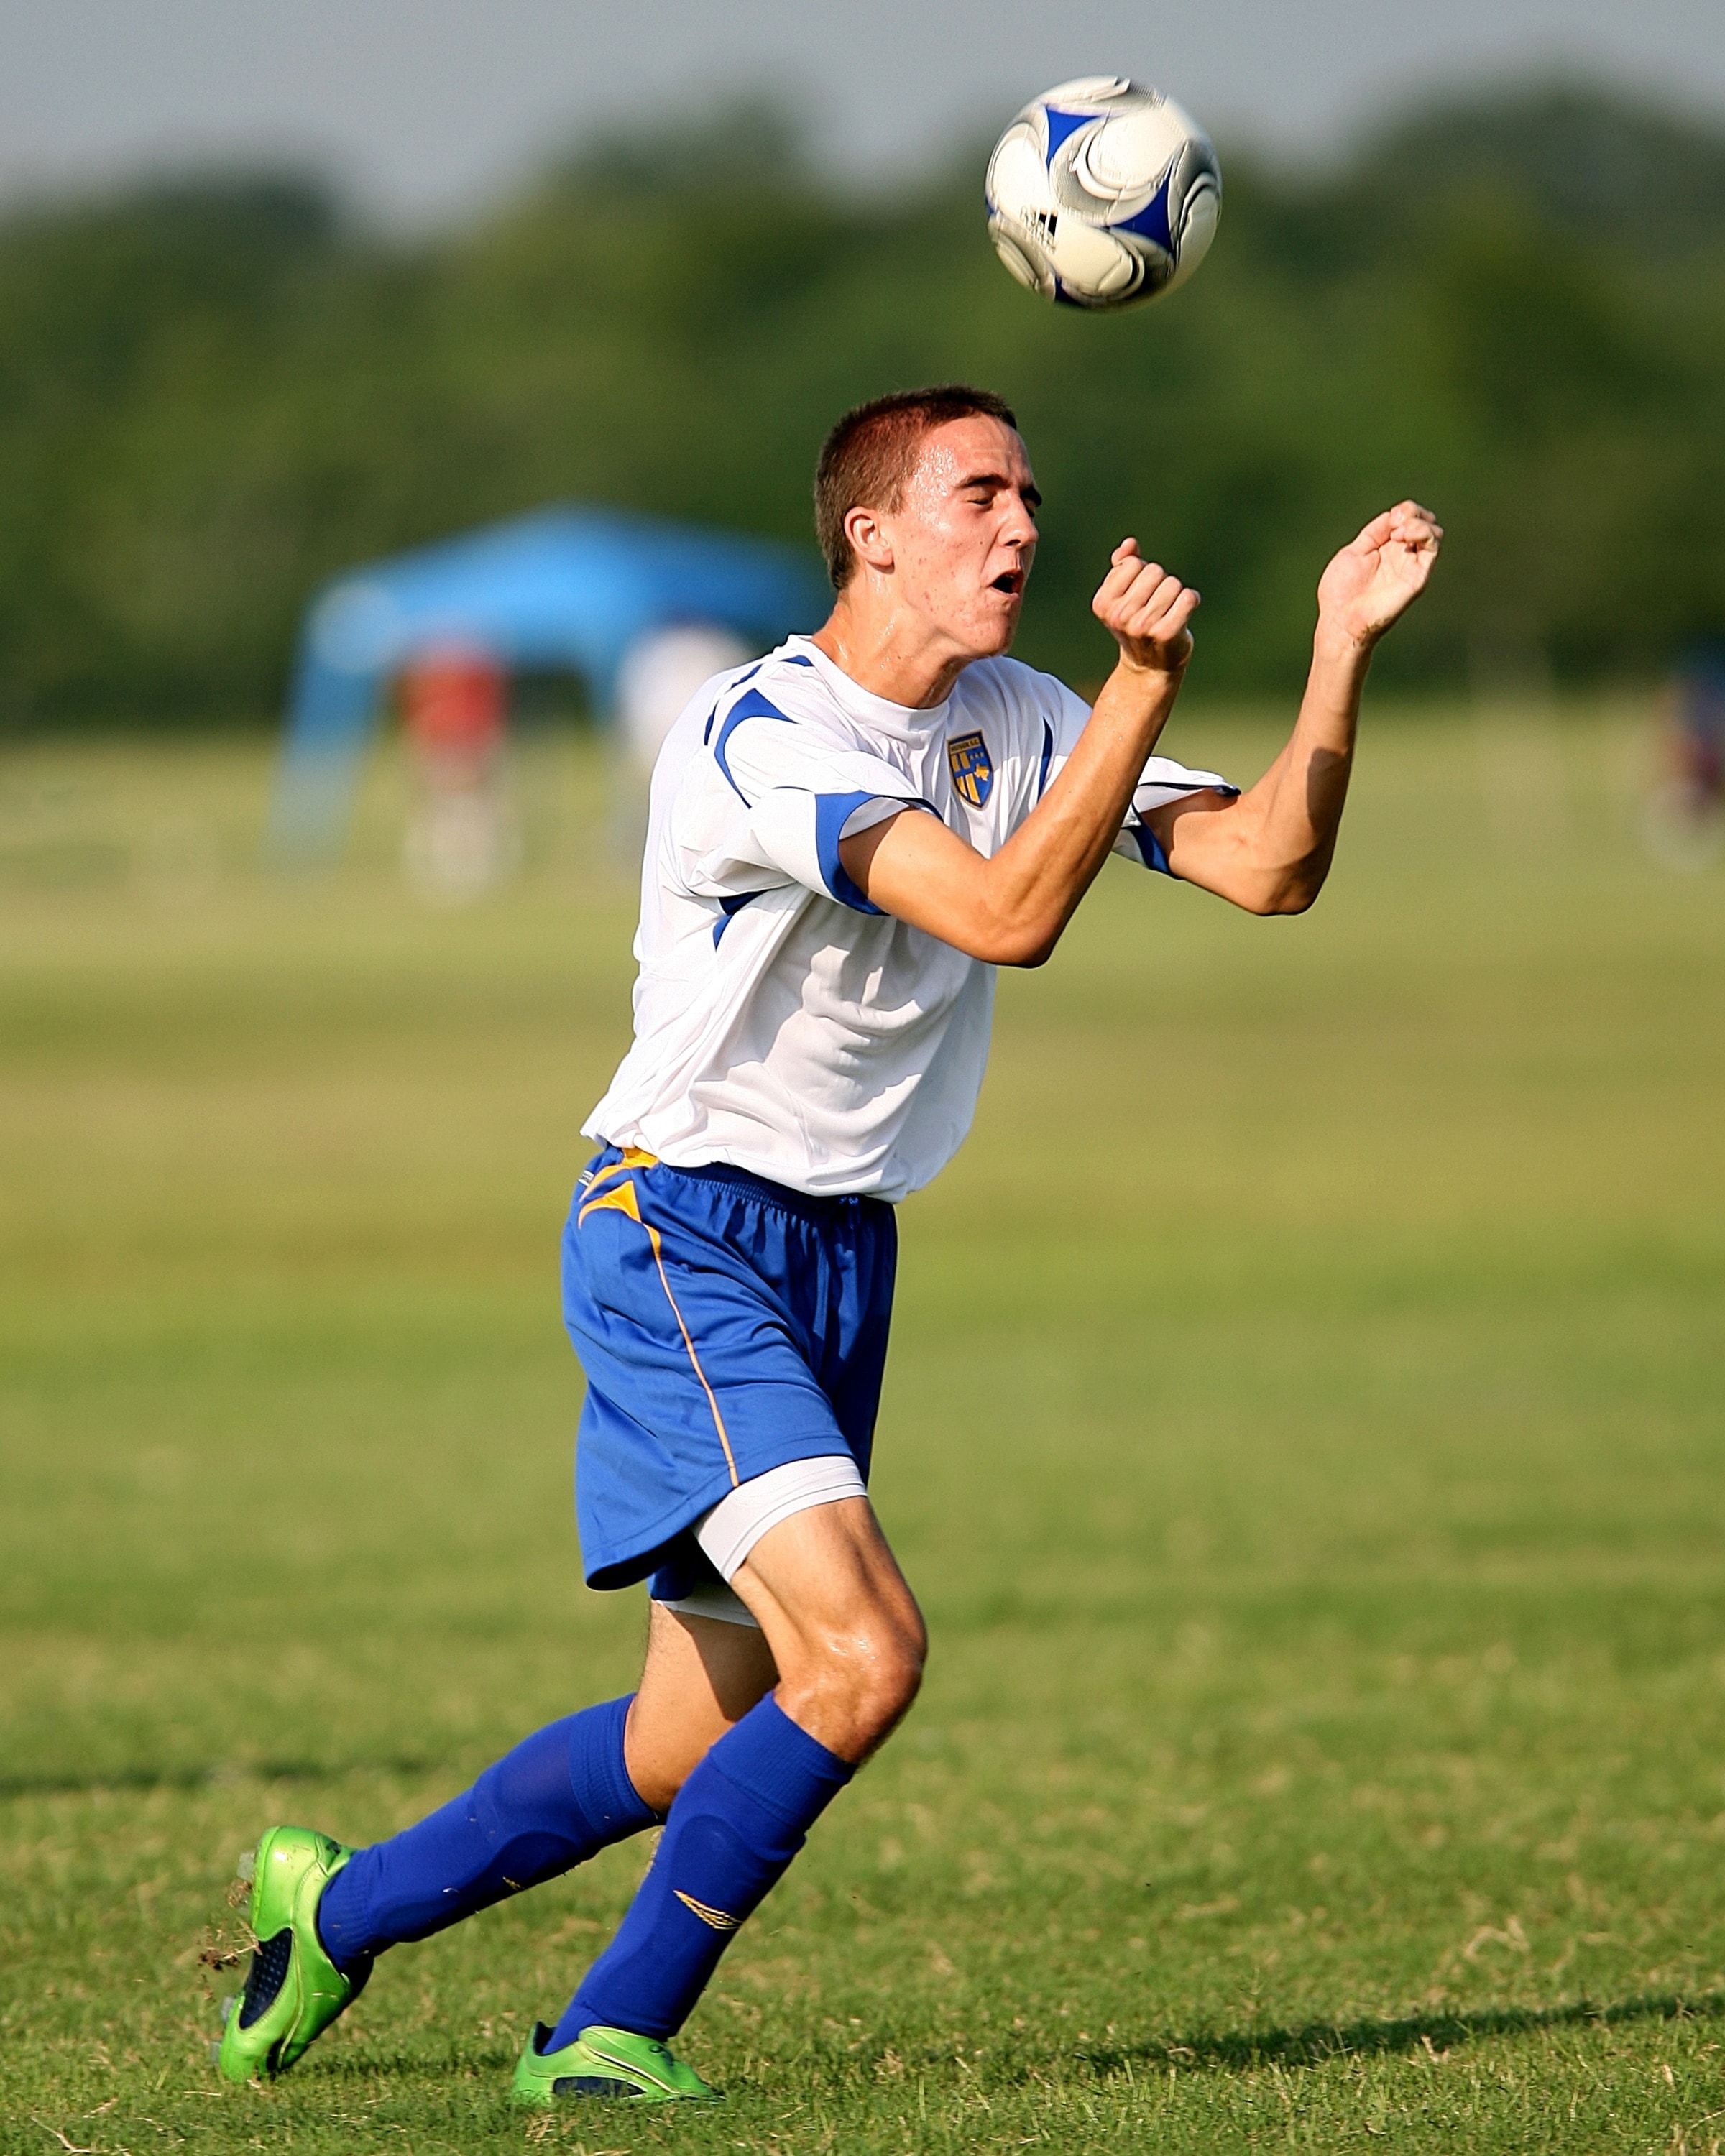 men\u0026#39;s white and blue crew neck t shirt blue shorts blue shin guards and green soccer cleats ...